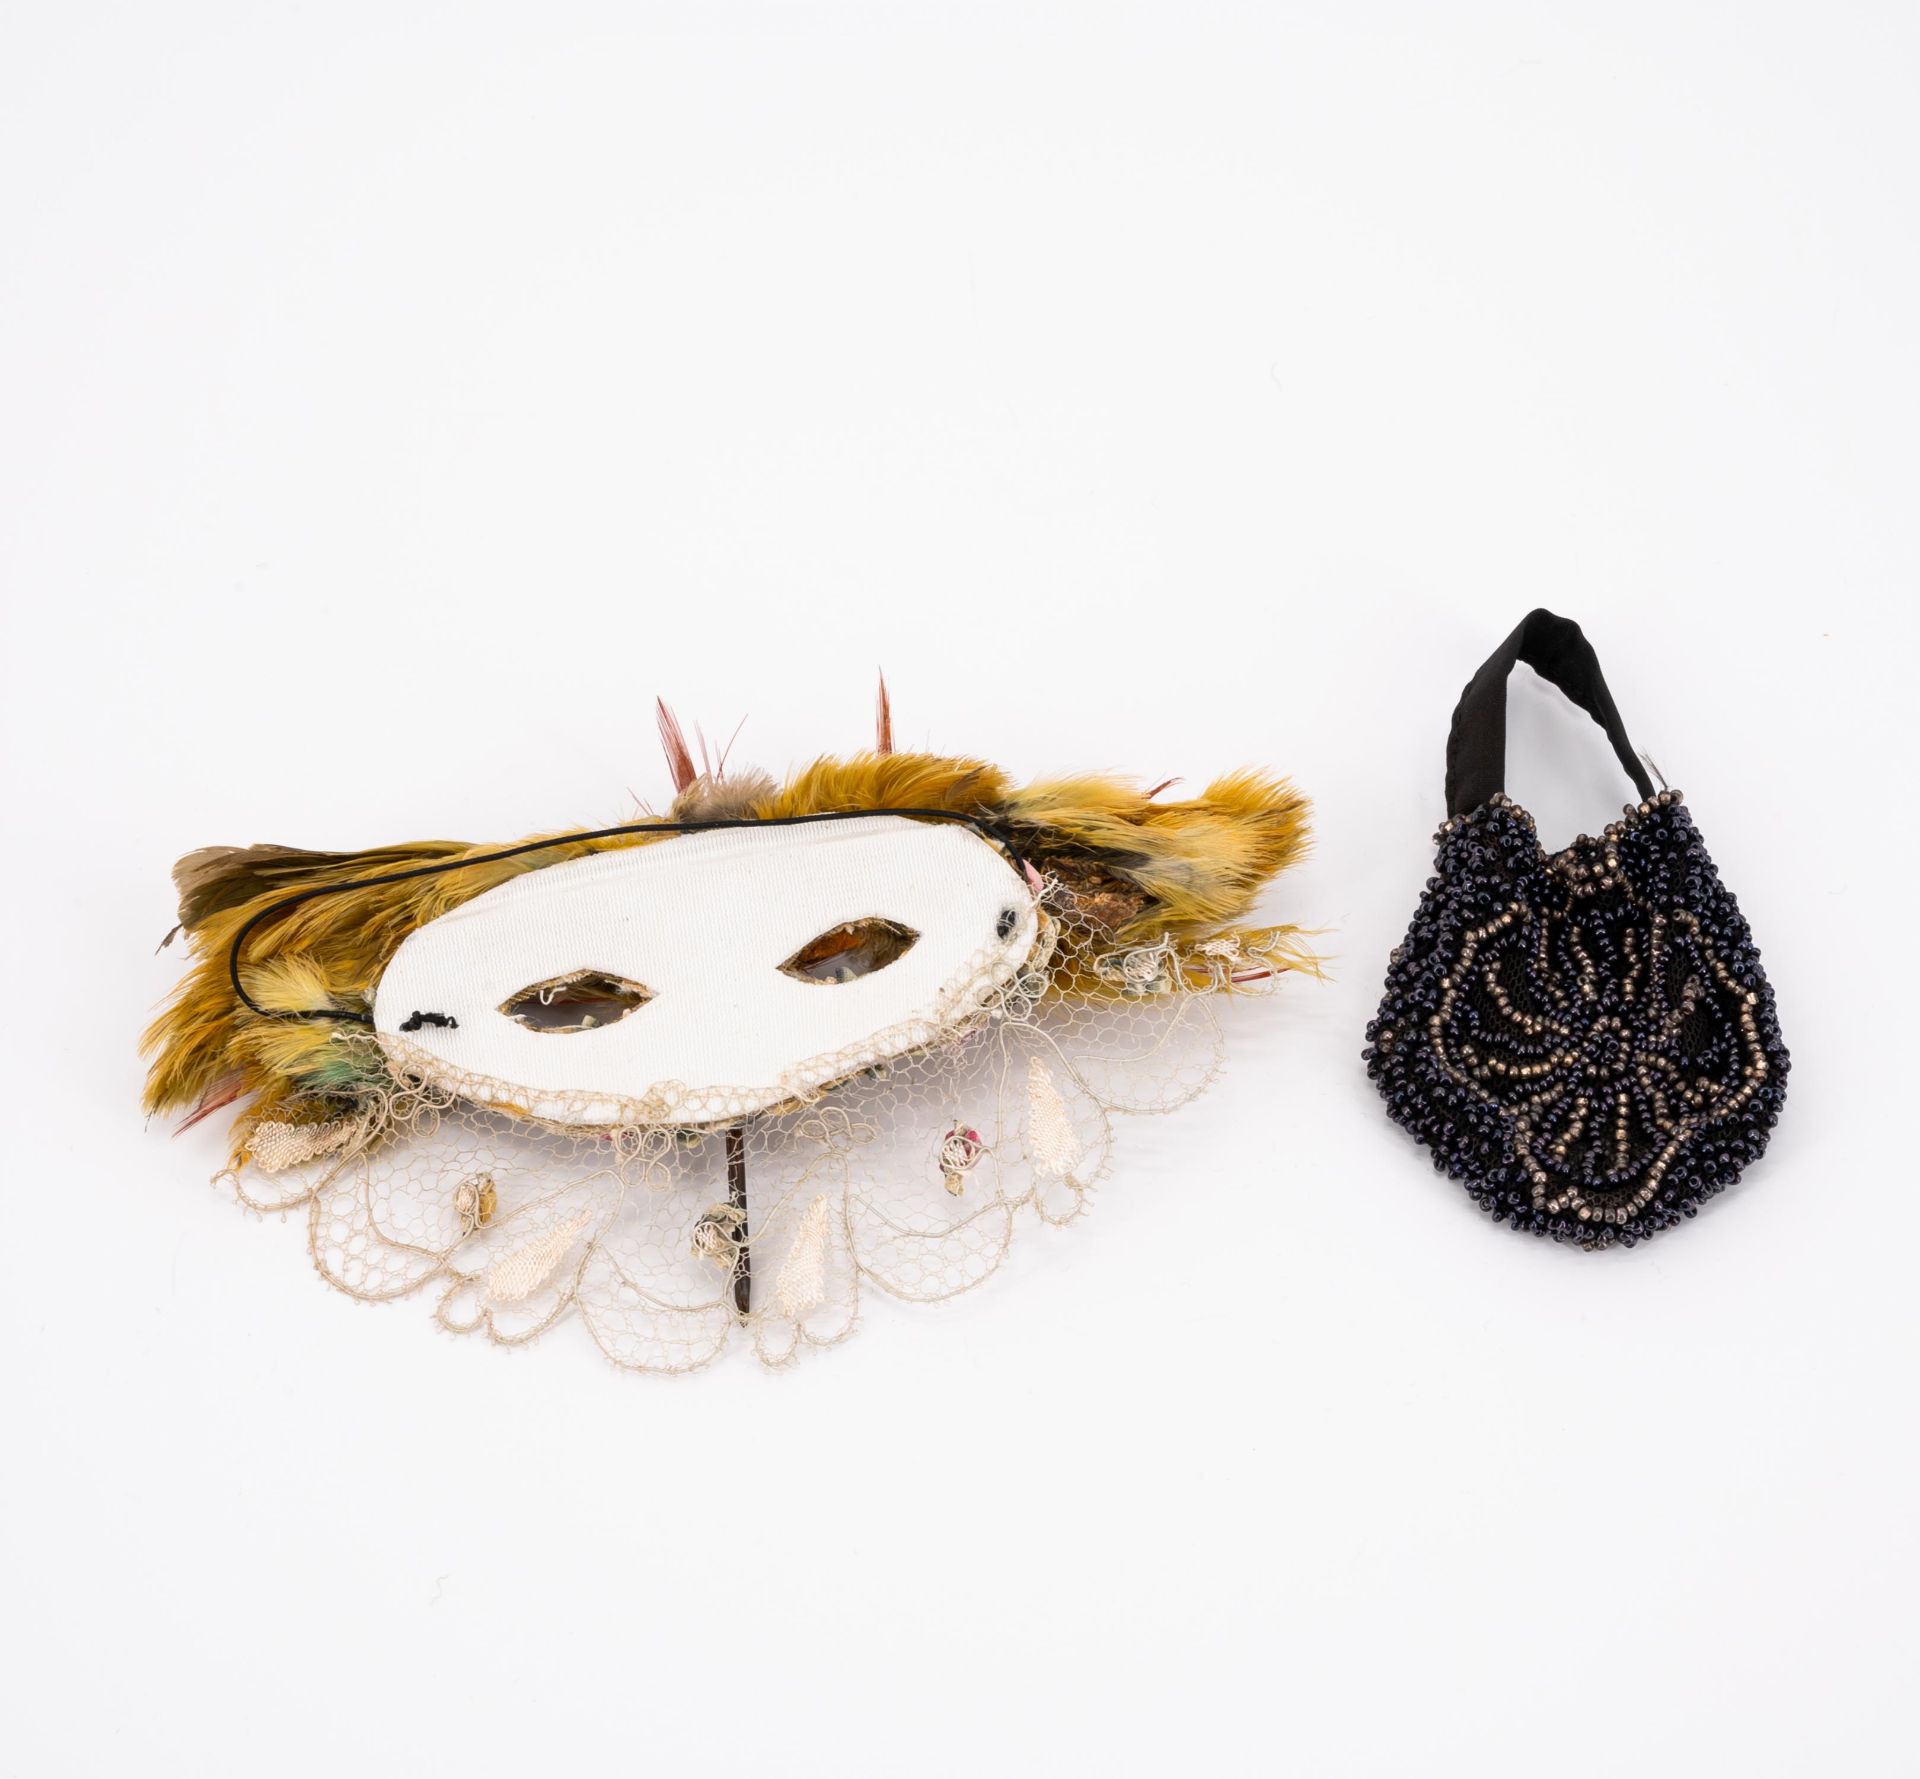 ENSEMBLE OF DOLL ACCESSORIES MADE OF LACE, PAPER, LEATHER, FEATHERS, WOOD AND METAL - Image 3 of 3